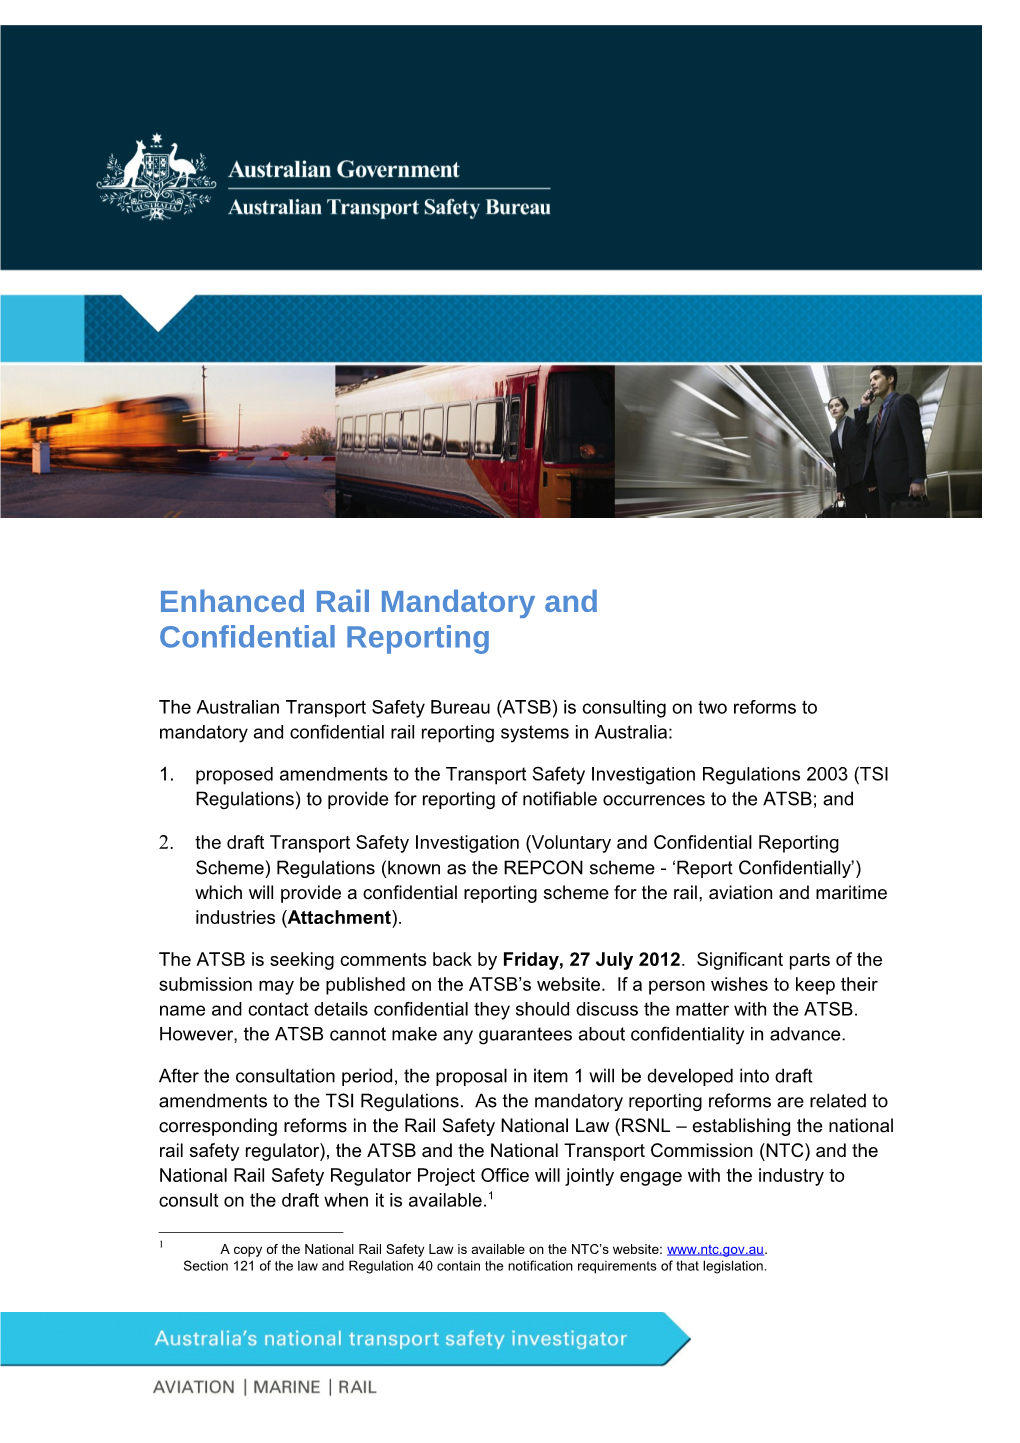 Rail Mandatory and Confidential Reporting